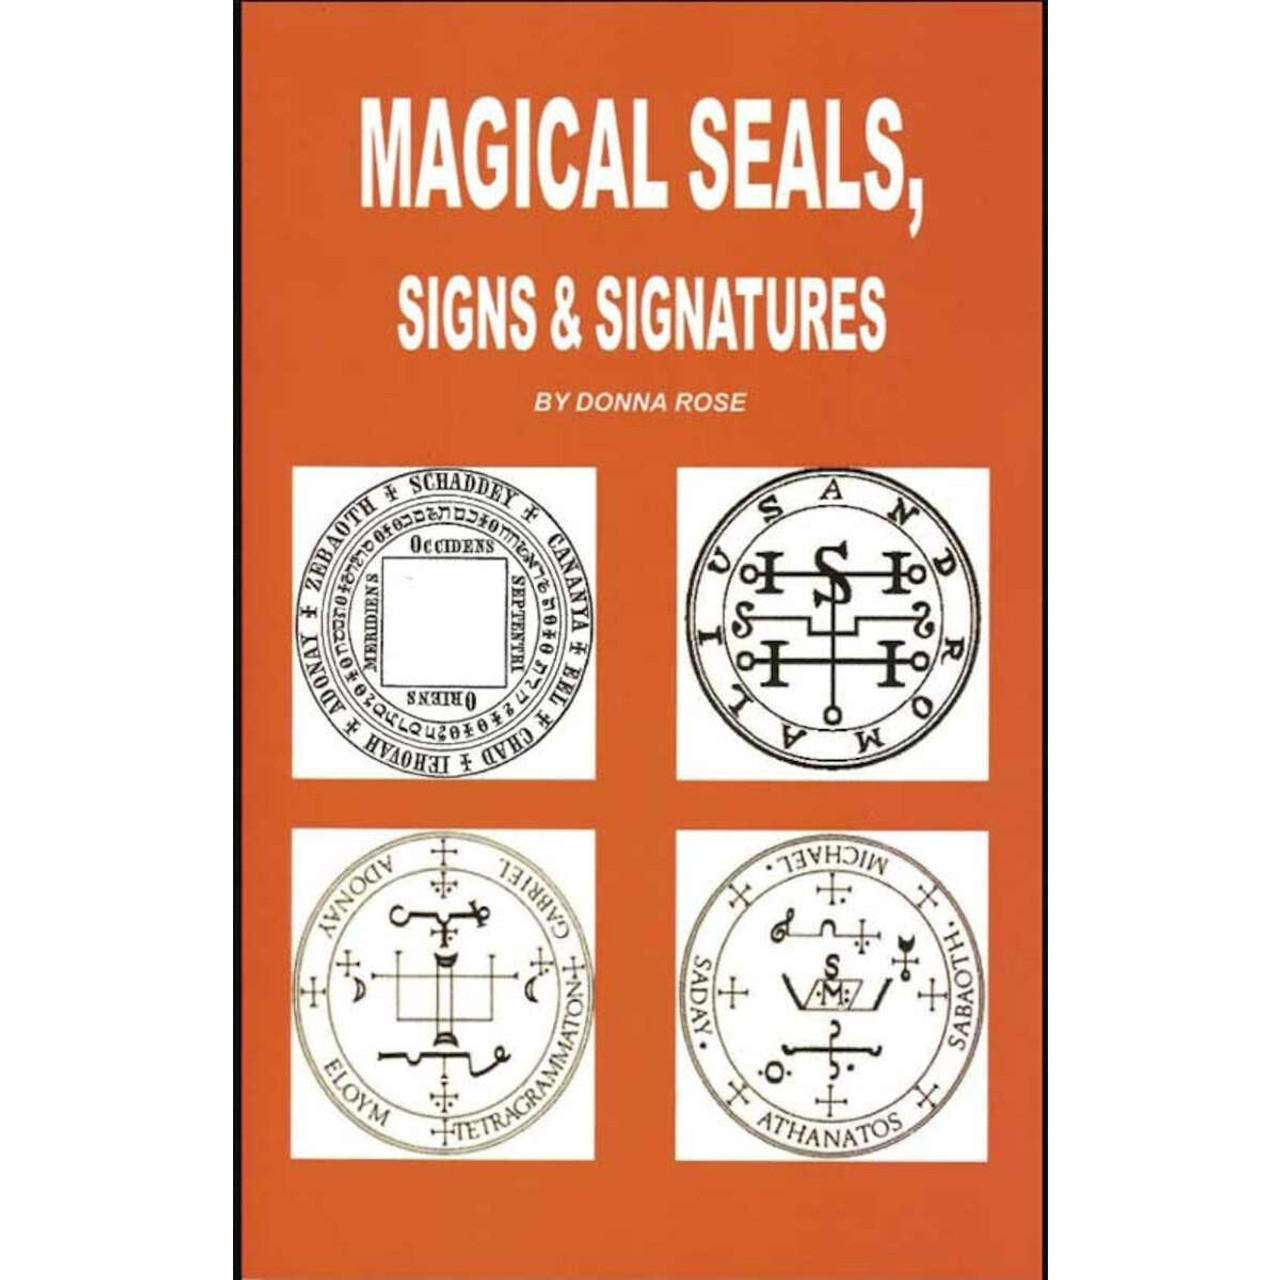 Magical Seals, Signs & Signatures by Donna Rose